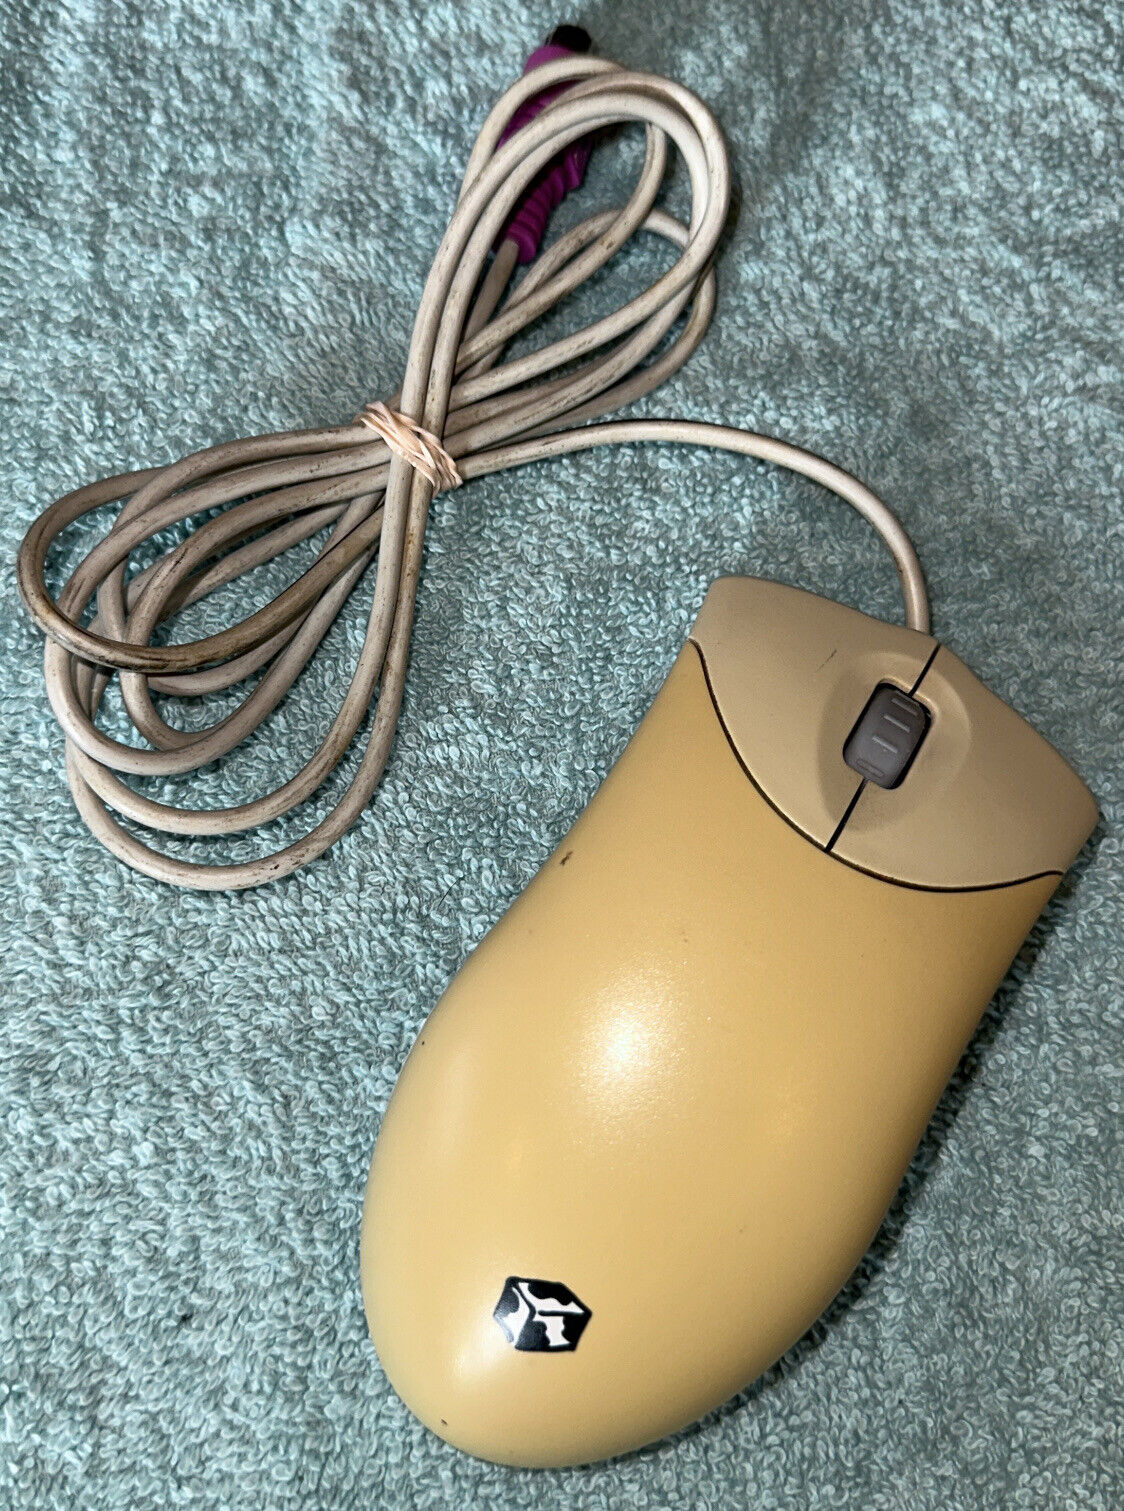 Vintage Gateway Mouse MOSXK PS/2 with 2 Buttons